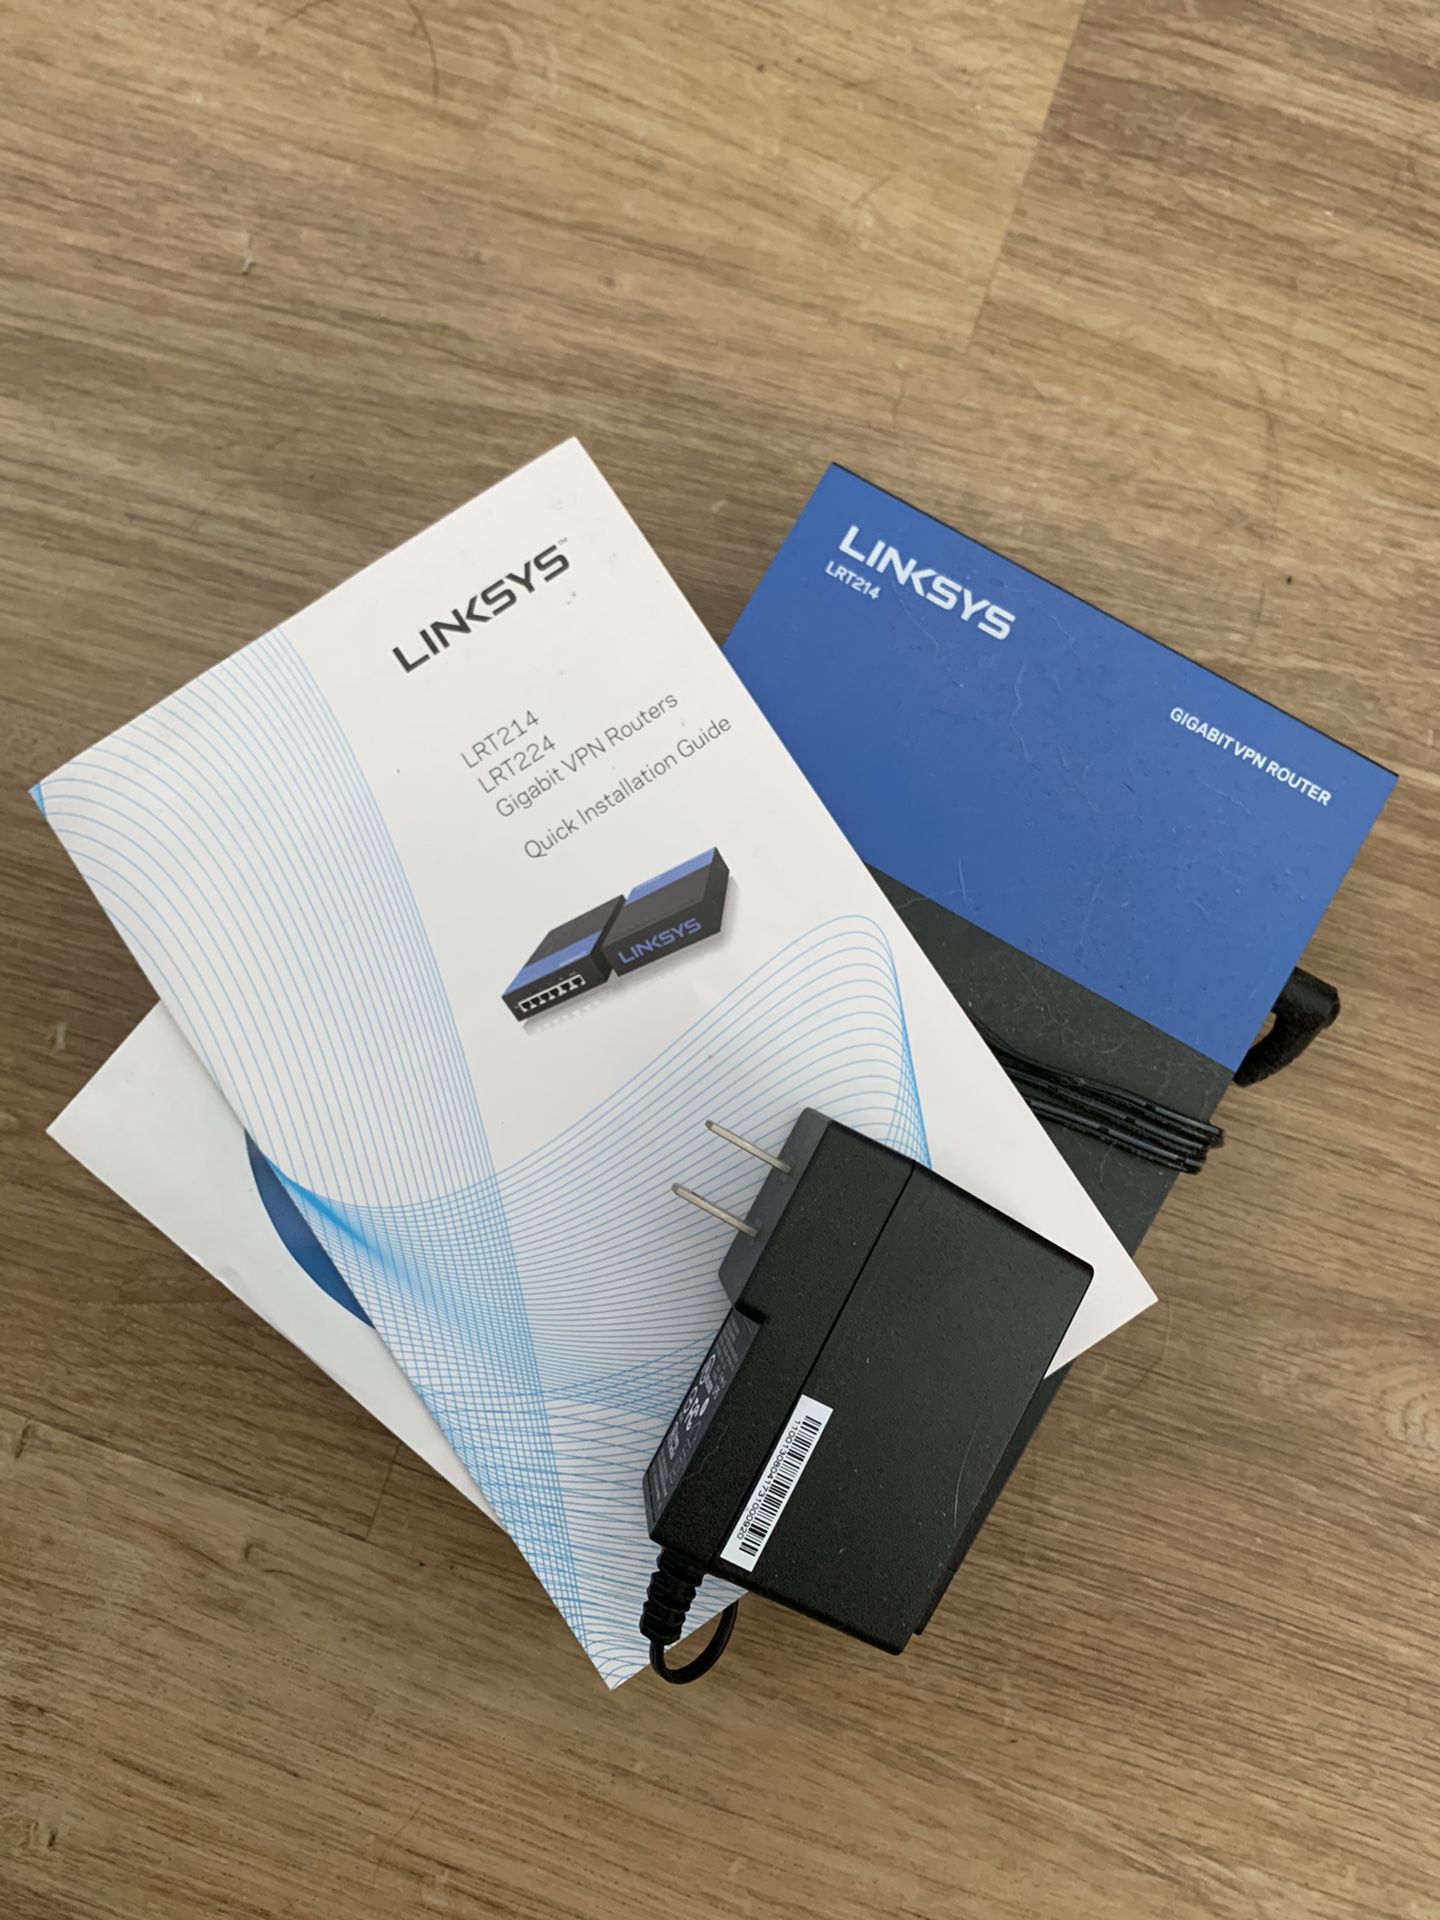 Linksys Linksys Business LRT214 Router 4-port switch GigE